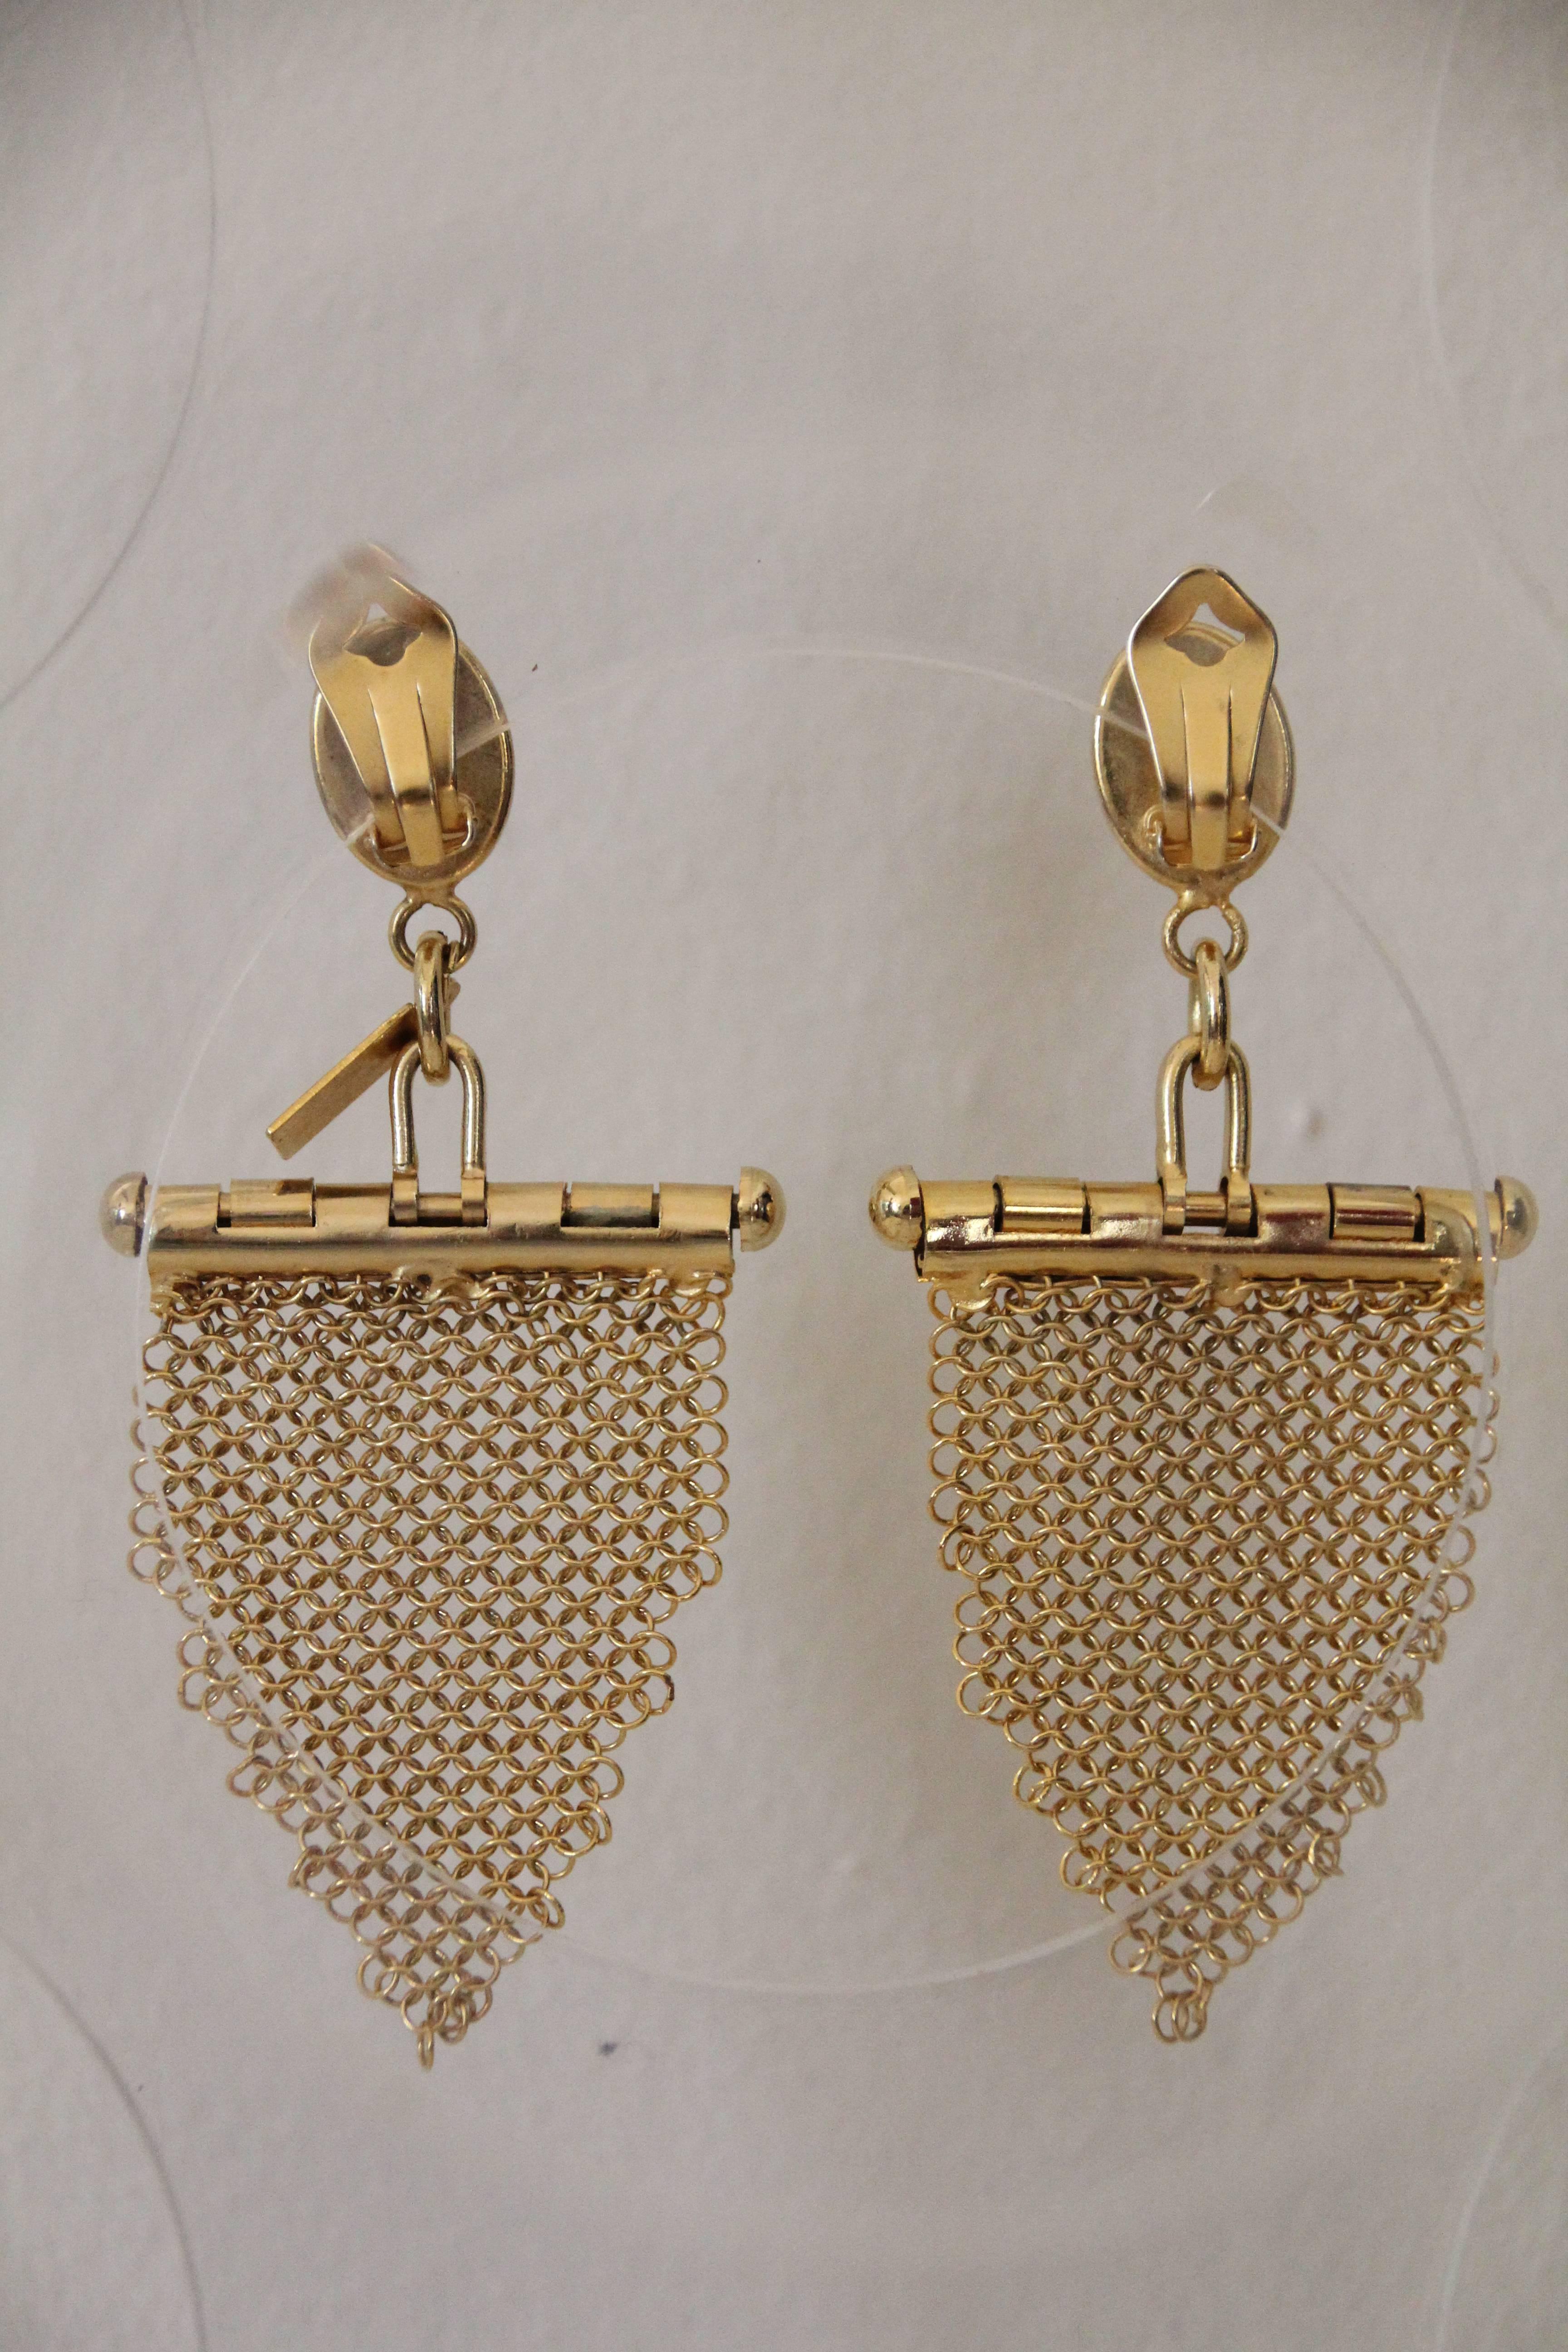 1980s U. Correani gold-tone chain mail fringe chandelier earrings. Dangling fringe is attached to a nicely designed hinged bar for lots of movement. Clip is topped with a carnelian-color glass cabochon. These gorgeous clip-ons are a dramatic 4